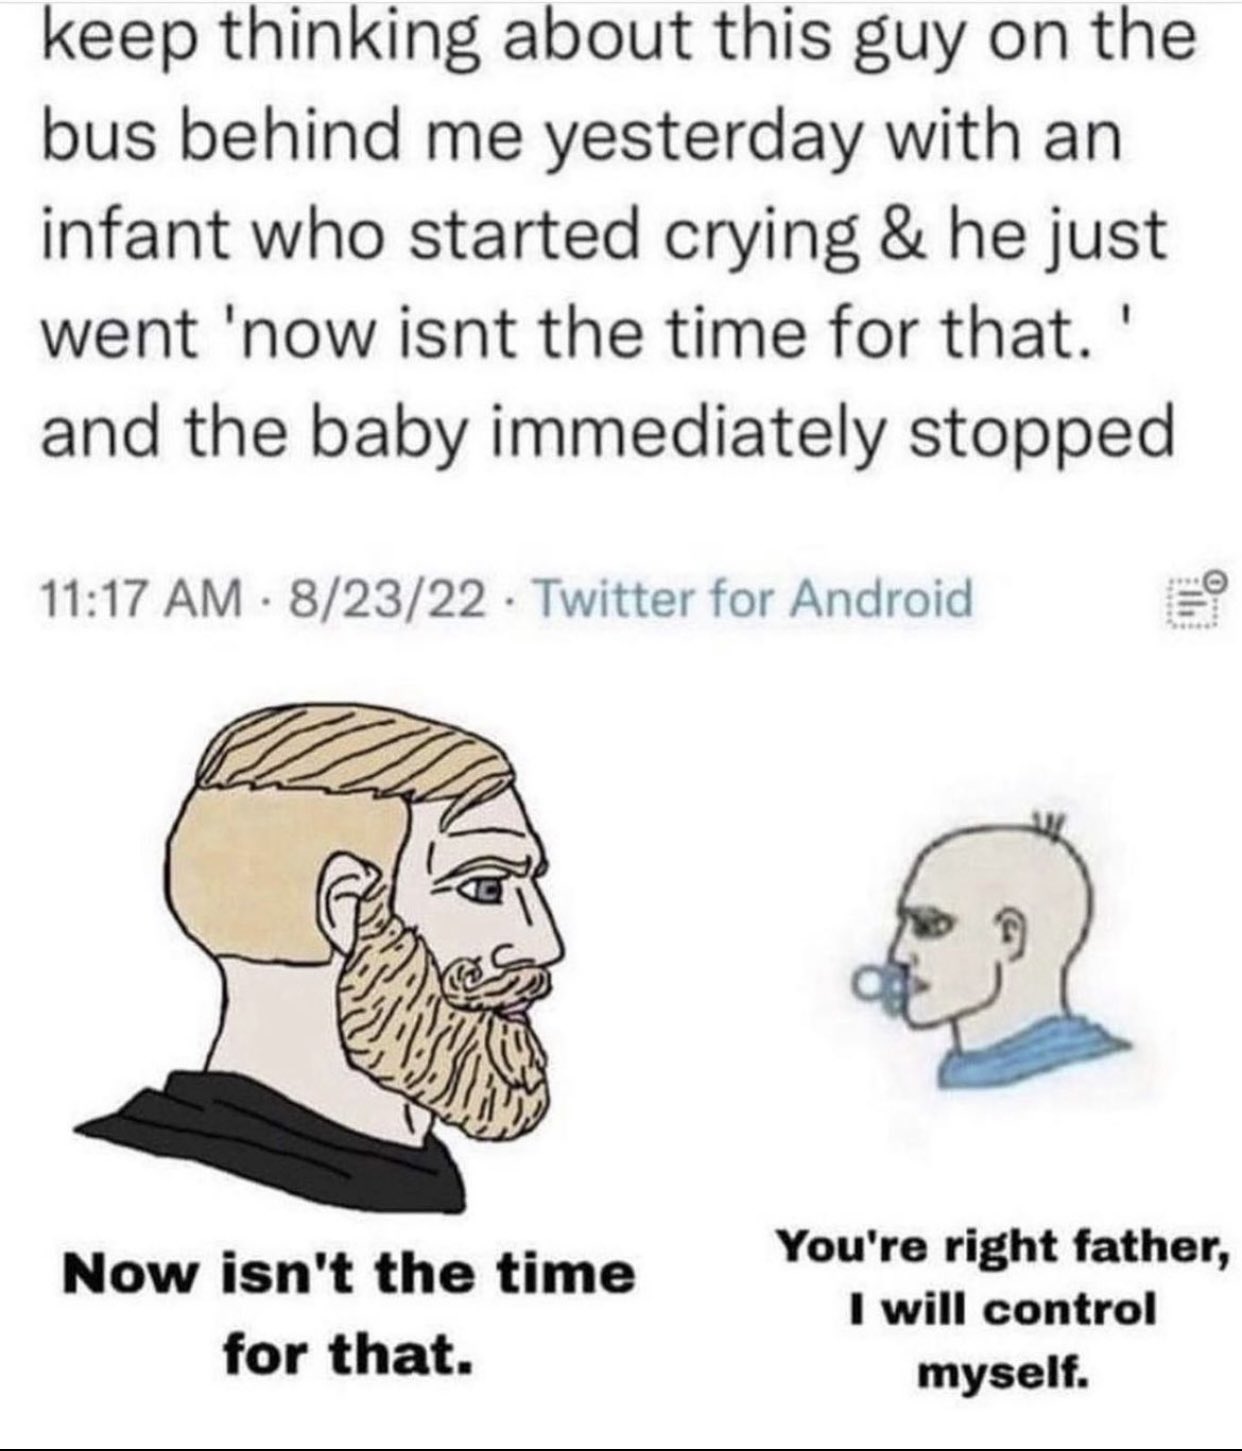 dudes posting their Ws - cartoon - keep thinking about this guy on the bus behind me yesterday with an infant who started crying & he just went 'now isnt the time for that. ' and the baby immediately stopped. 82322 Twitter for Android . Now isn't the time